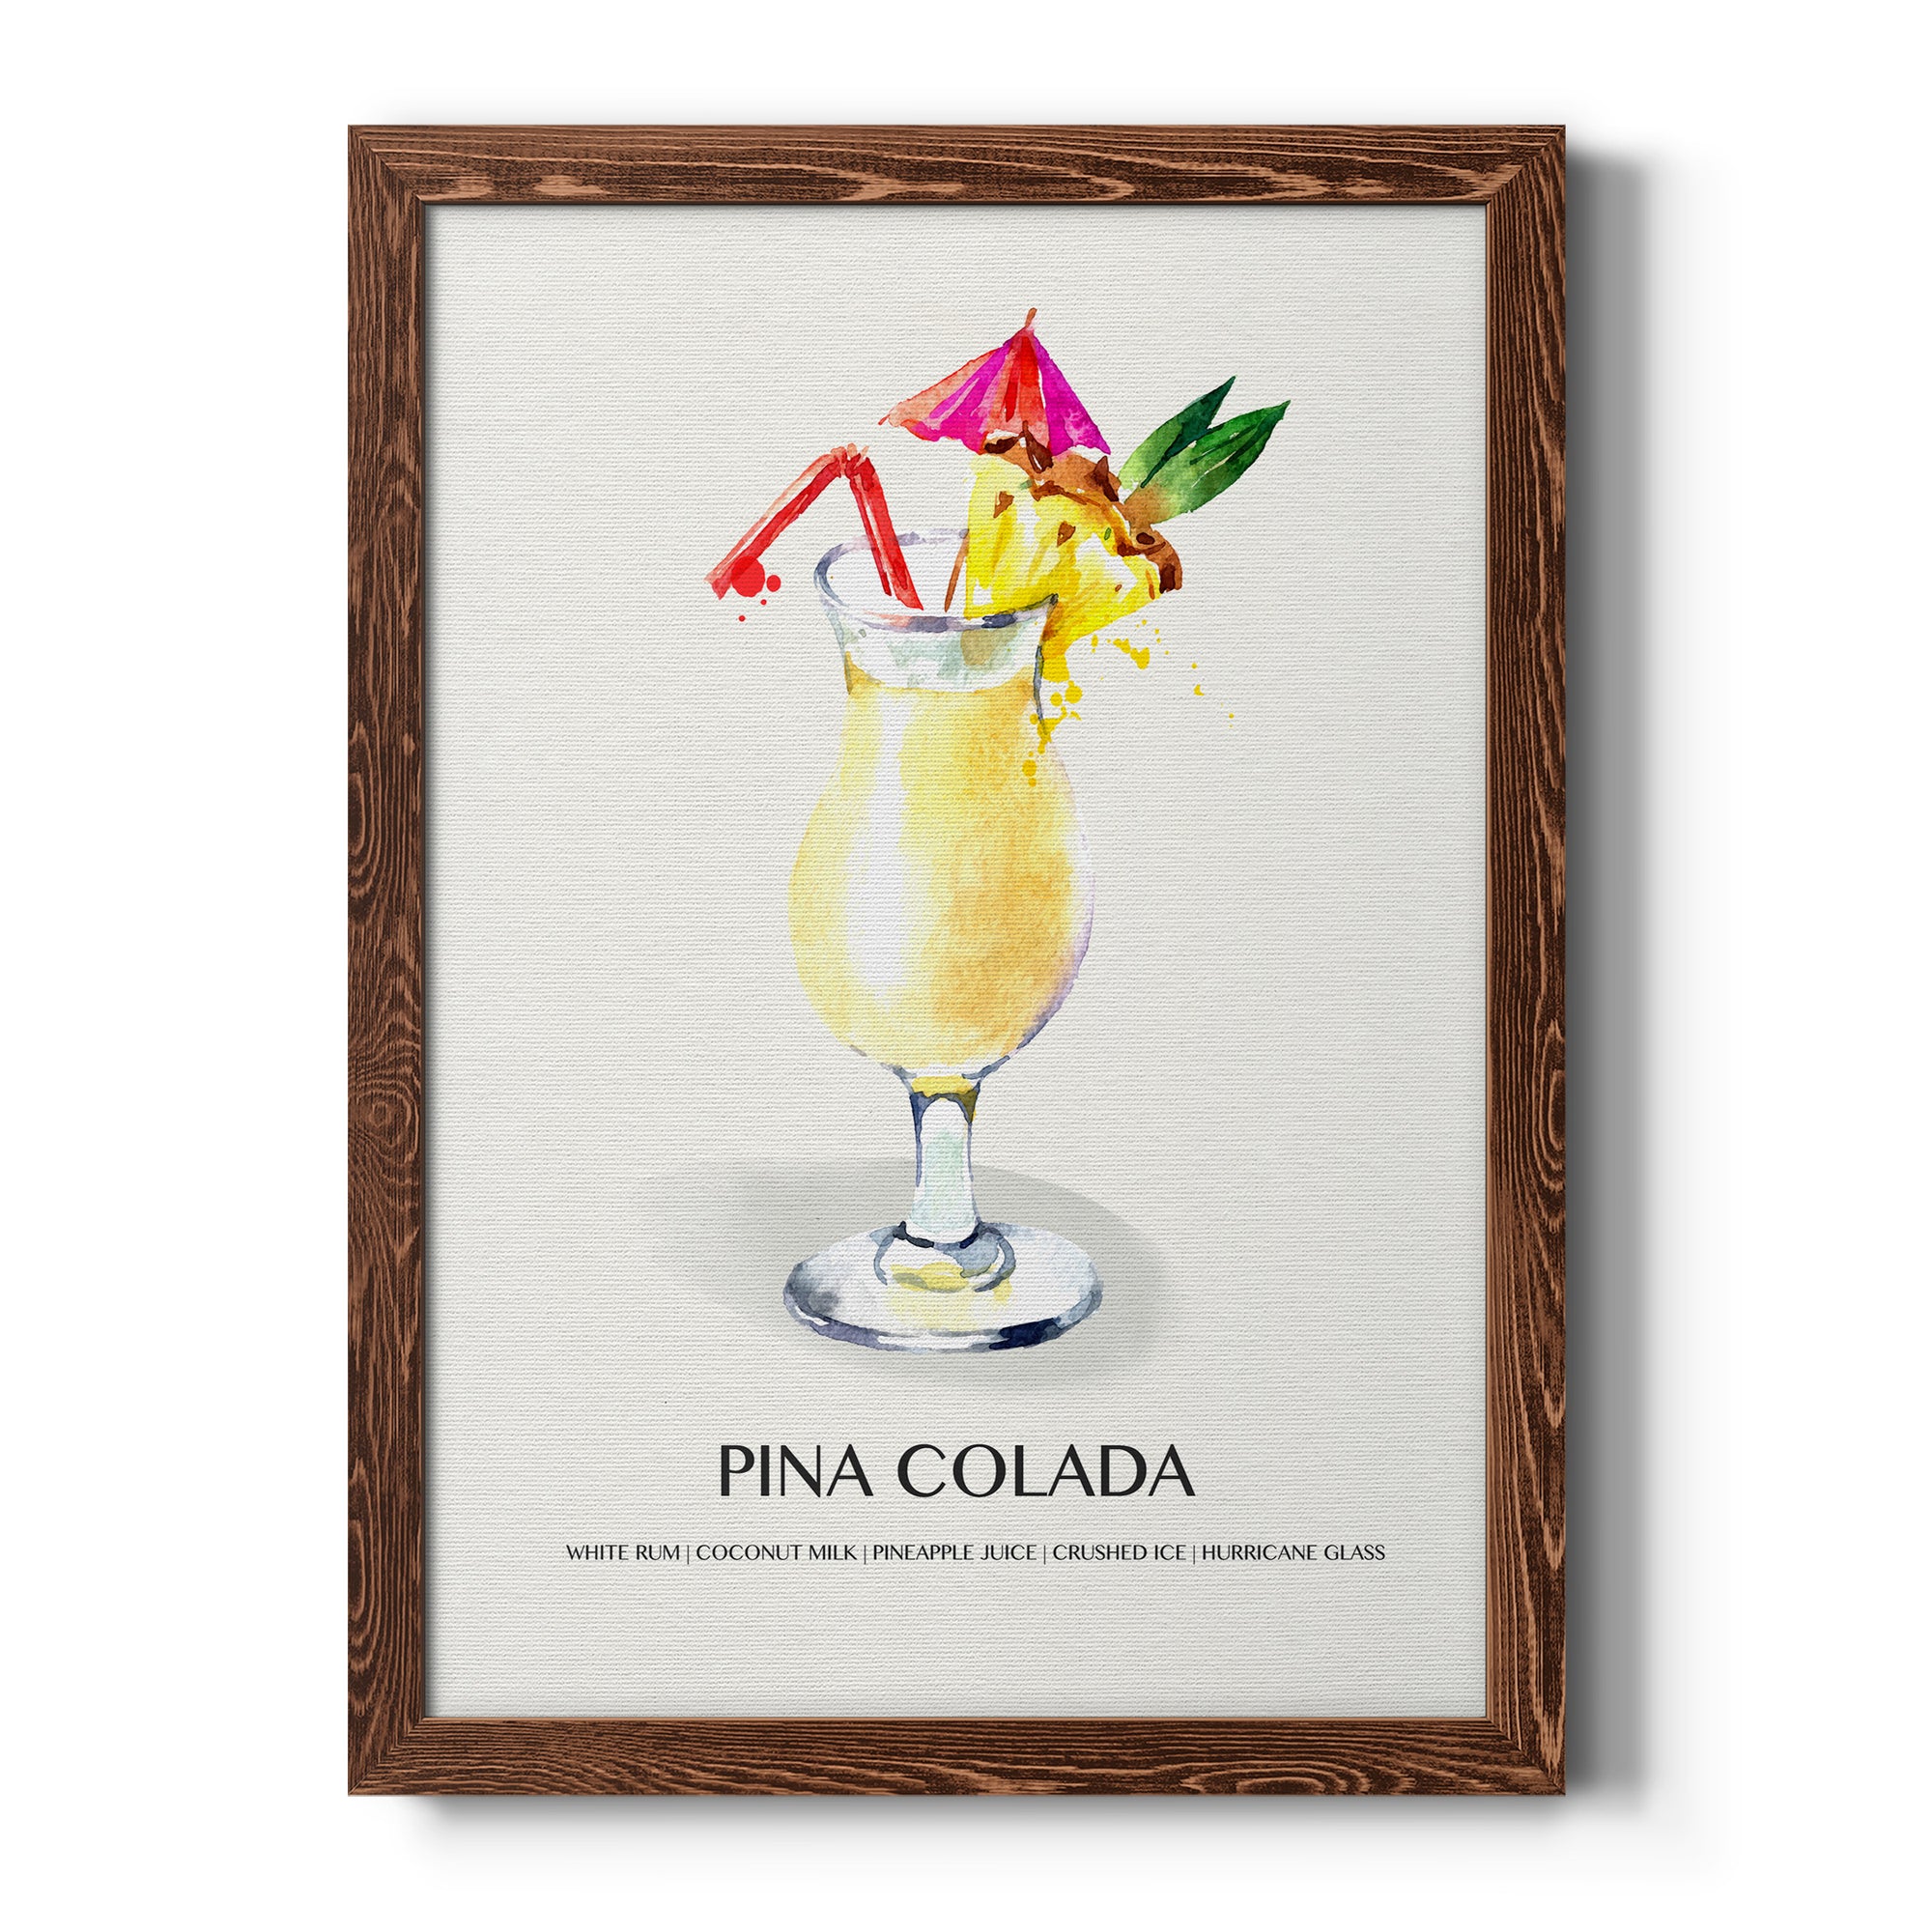 Pina Colada - Premium Canvas Framed in Barnwood - Ready to Hang